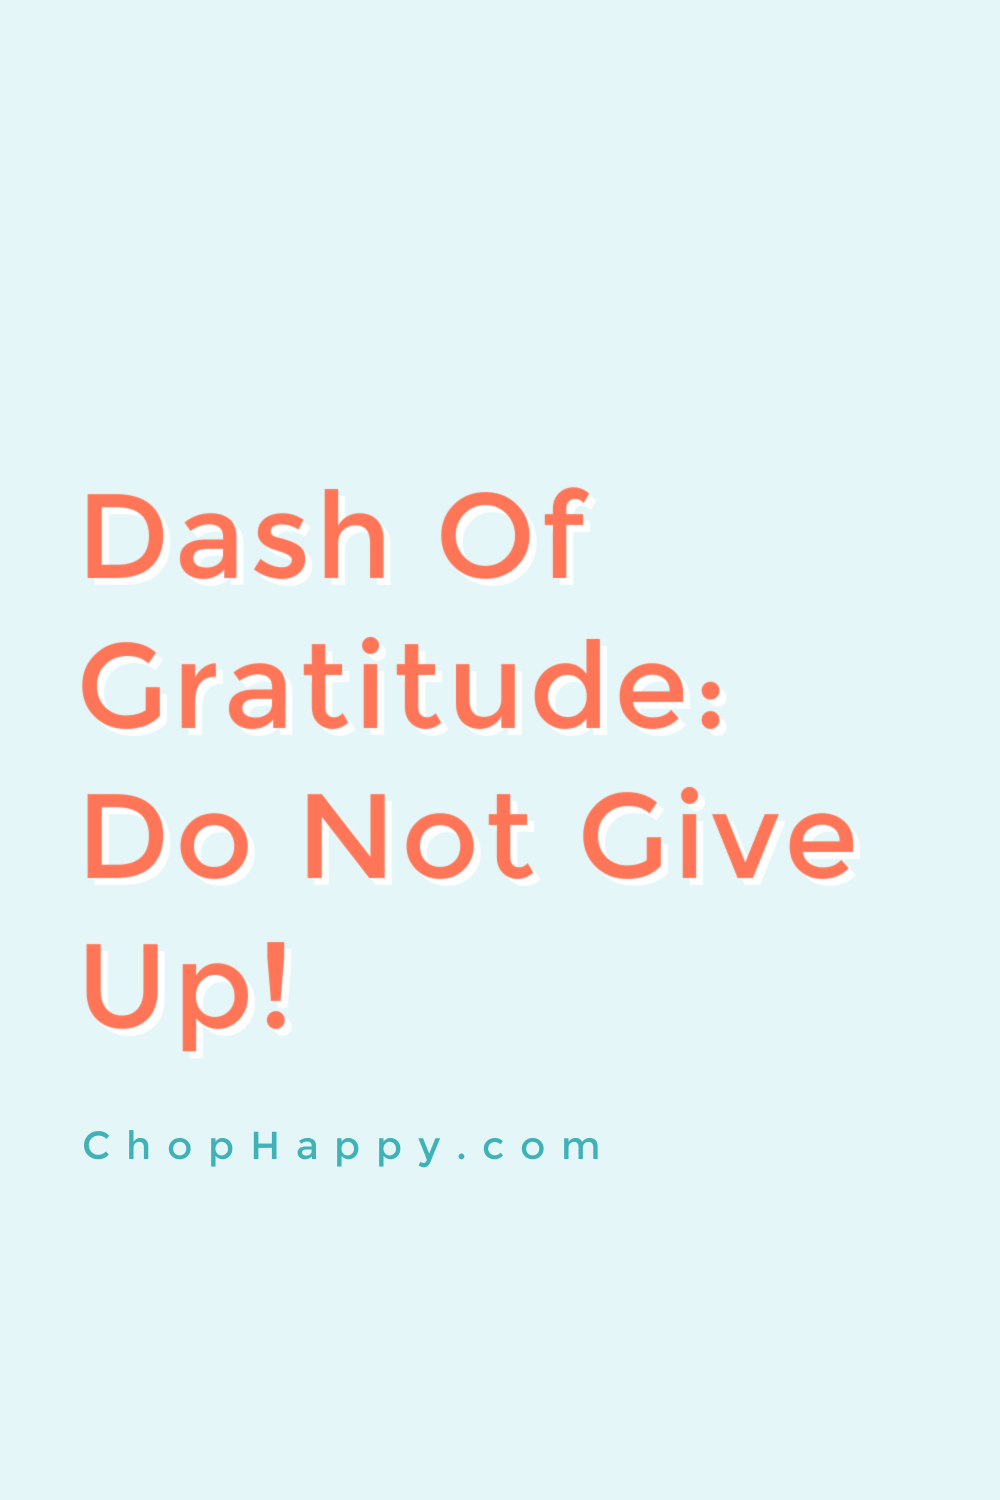 Dash of Gratitude: Do Not Give Up Video. This is a video that gives you motivation to go for your dreams. Happy Today! www.ChopHappy.com #gratitude #motivationalvideo